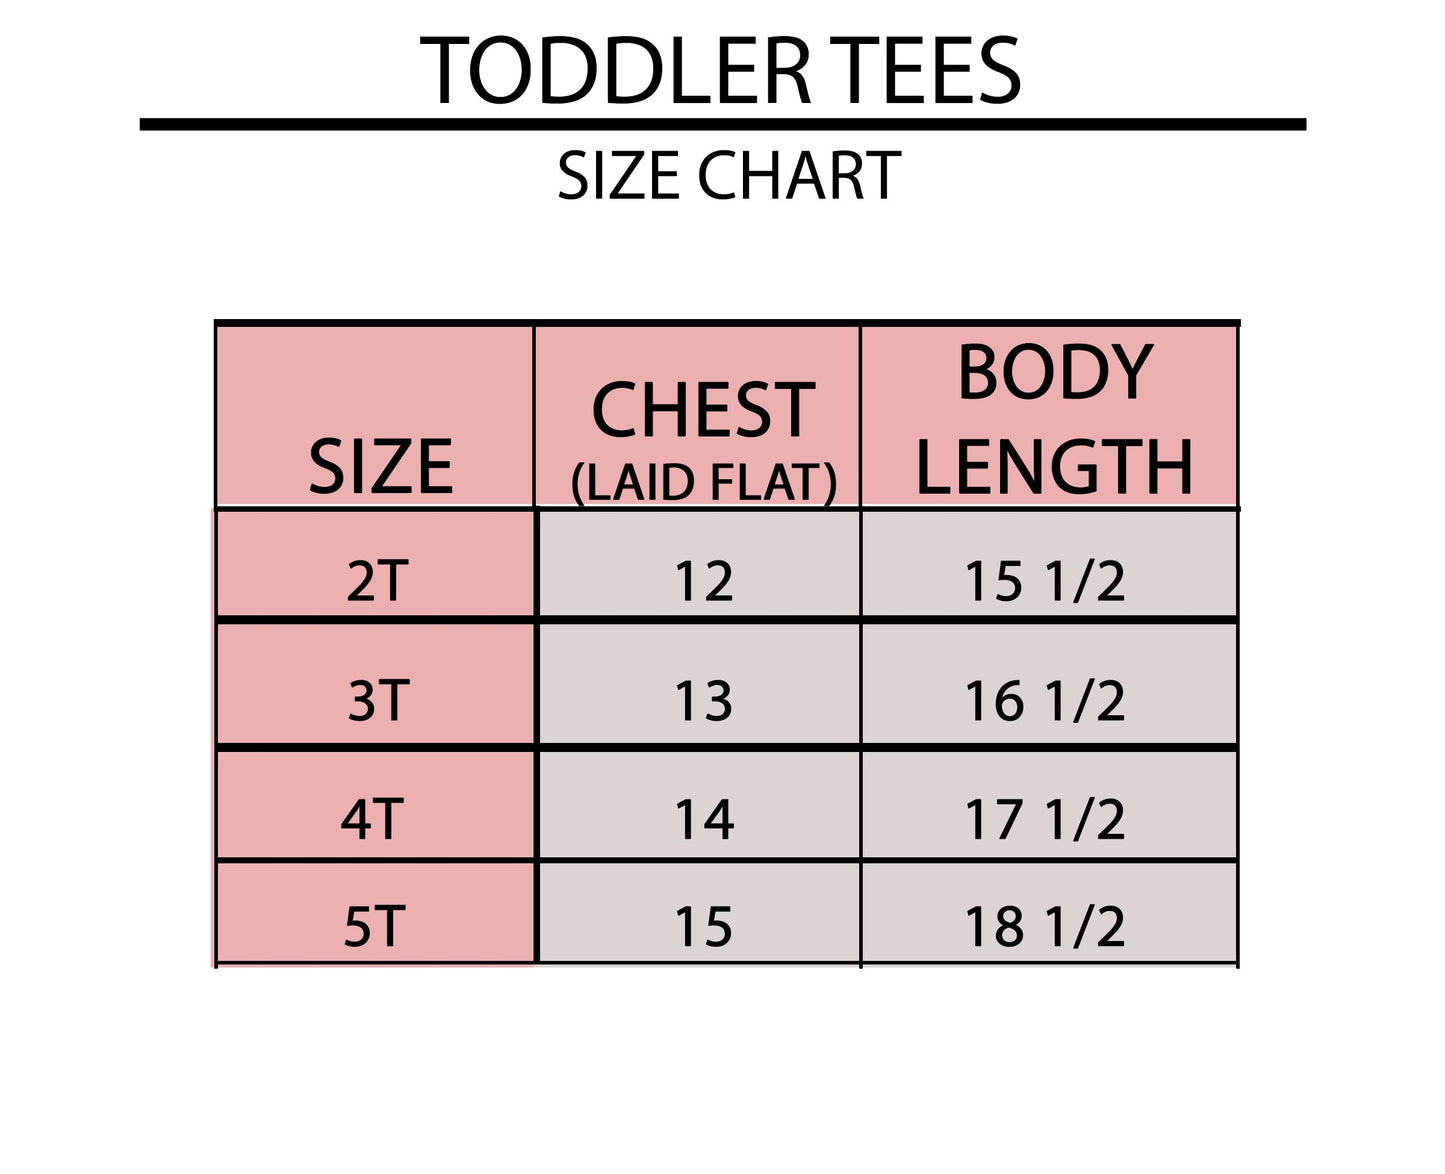 Fabboolus | Toddler Graphic Short Sleeve Tee